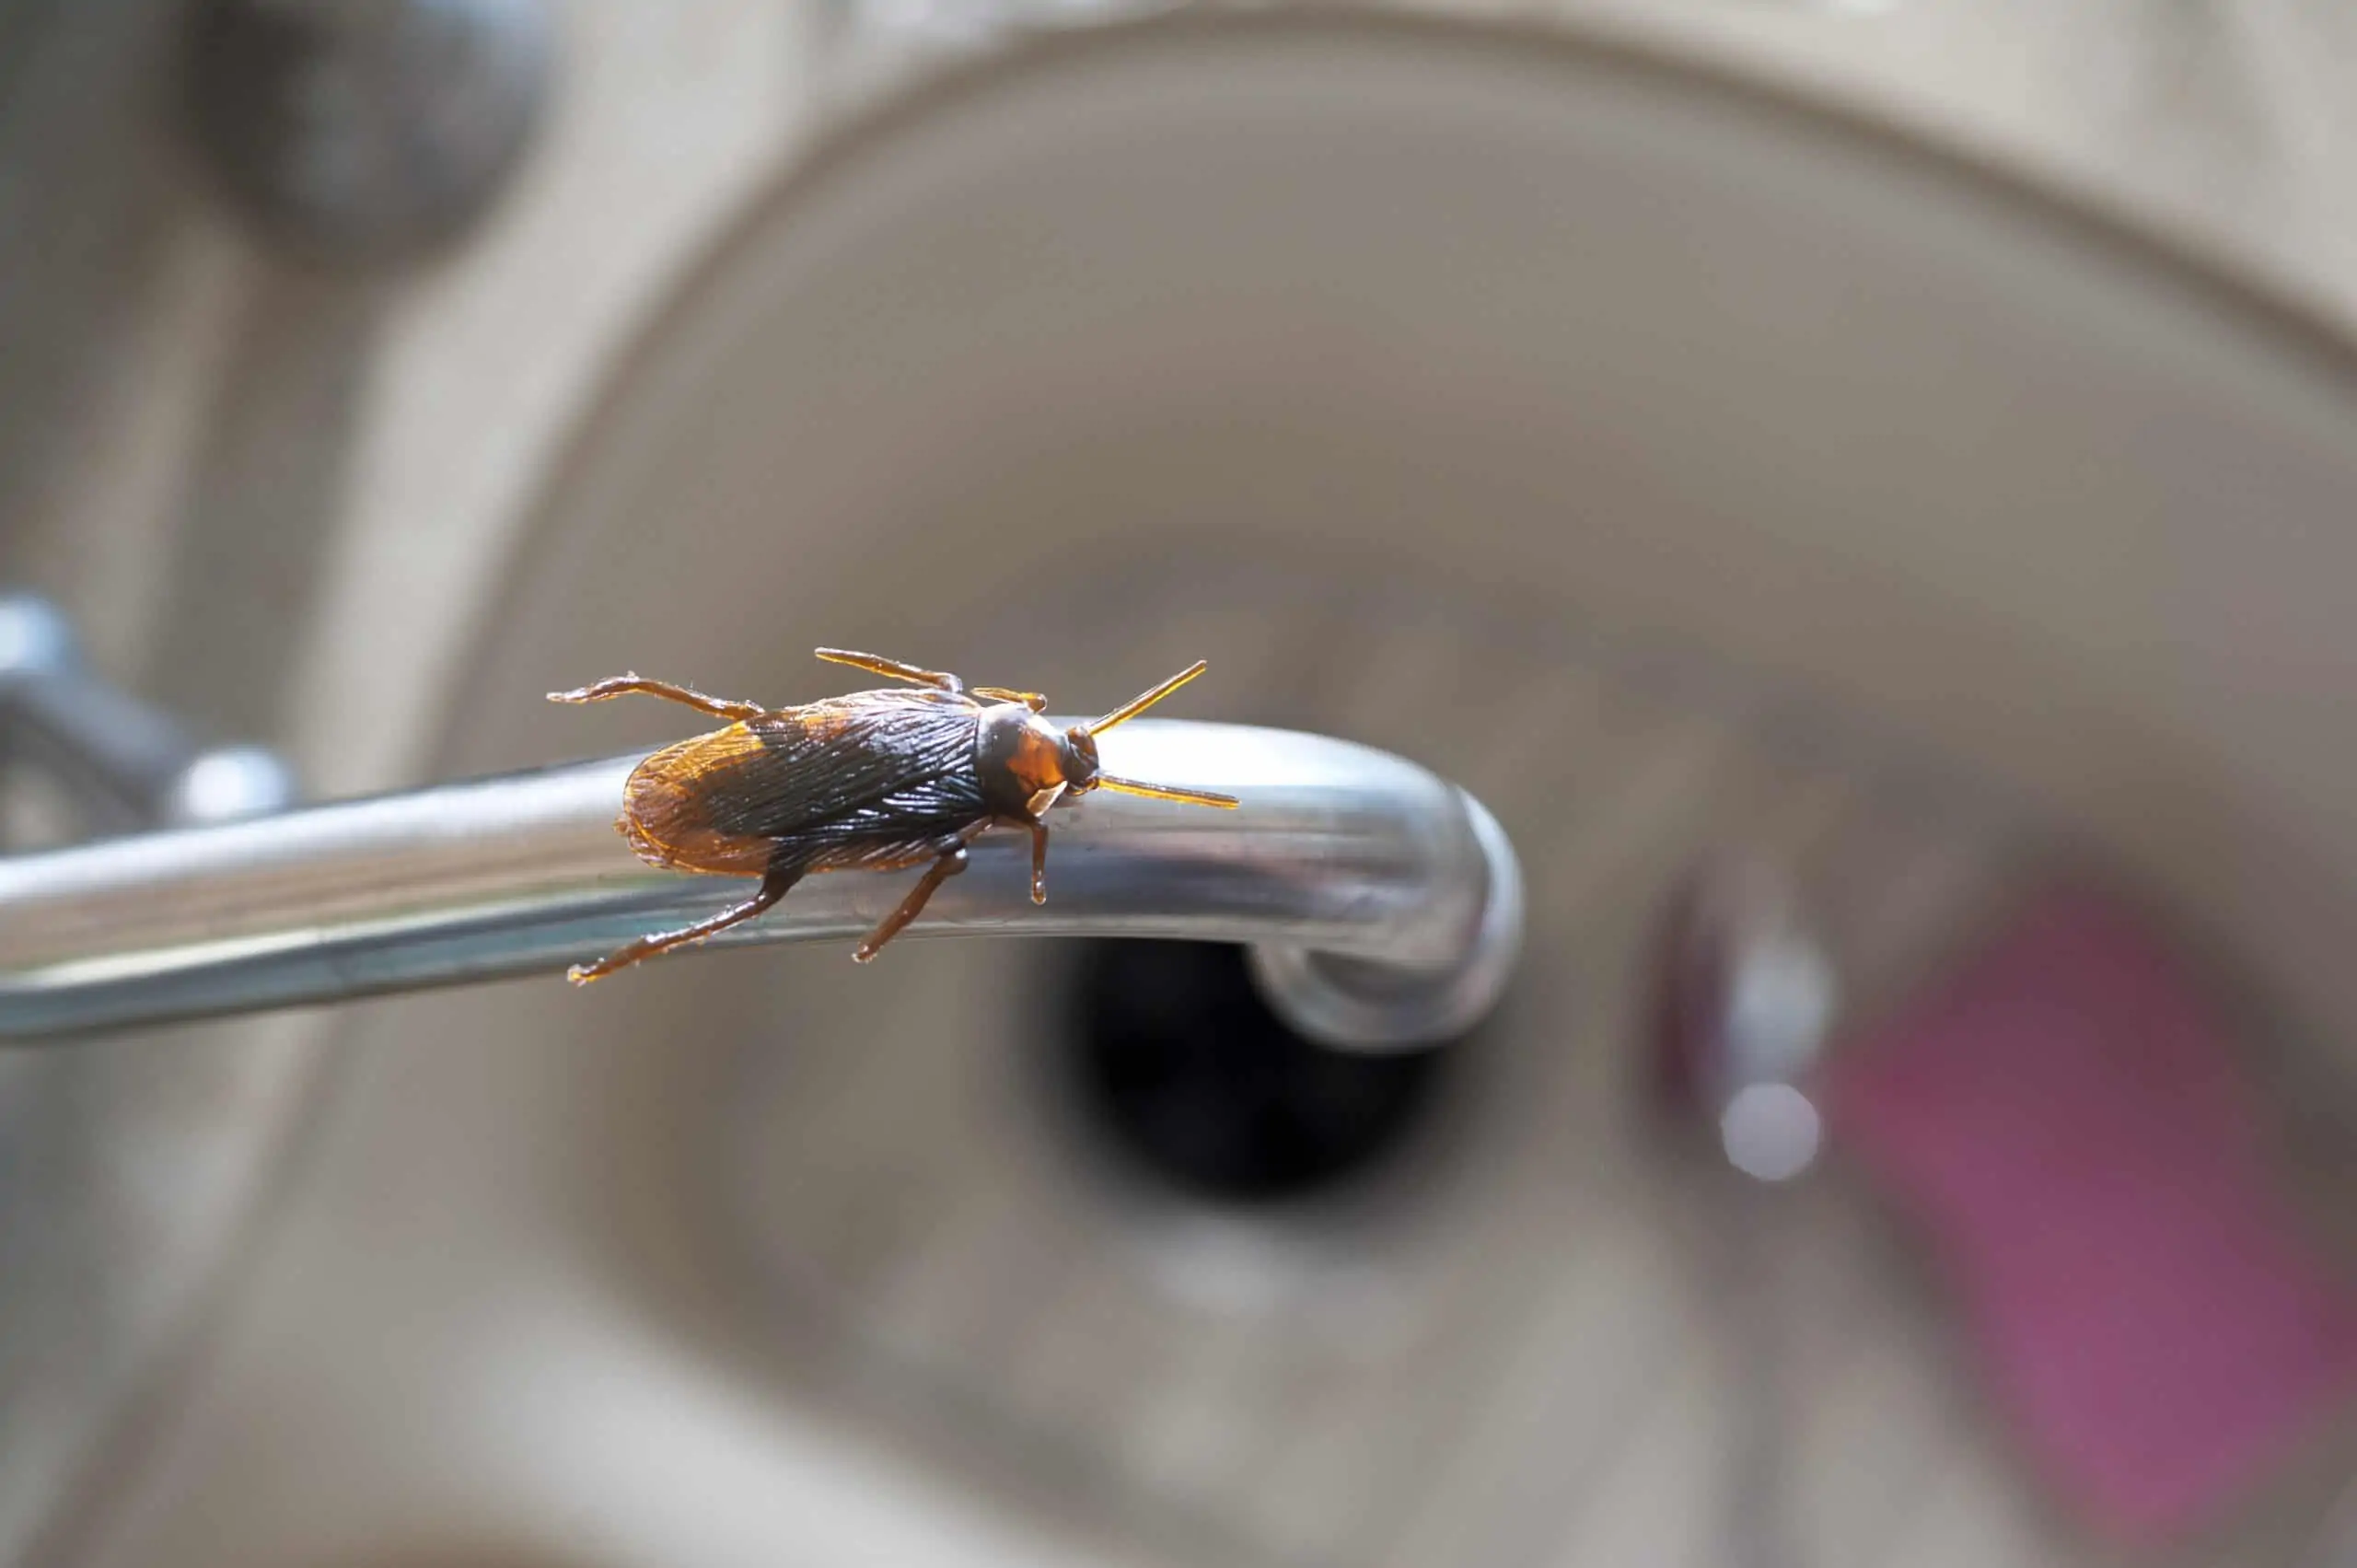 Business services image is a cockroach on the faucet of a sink with the camera angle looking into the sink.